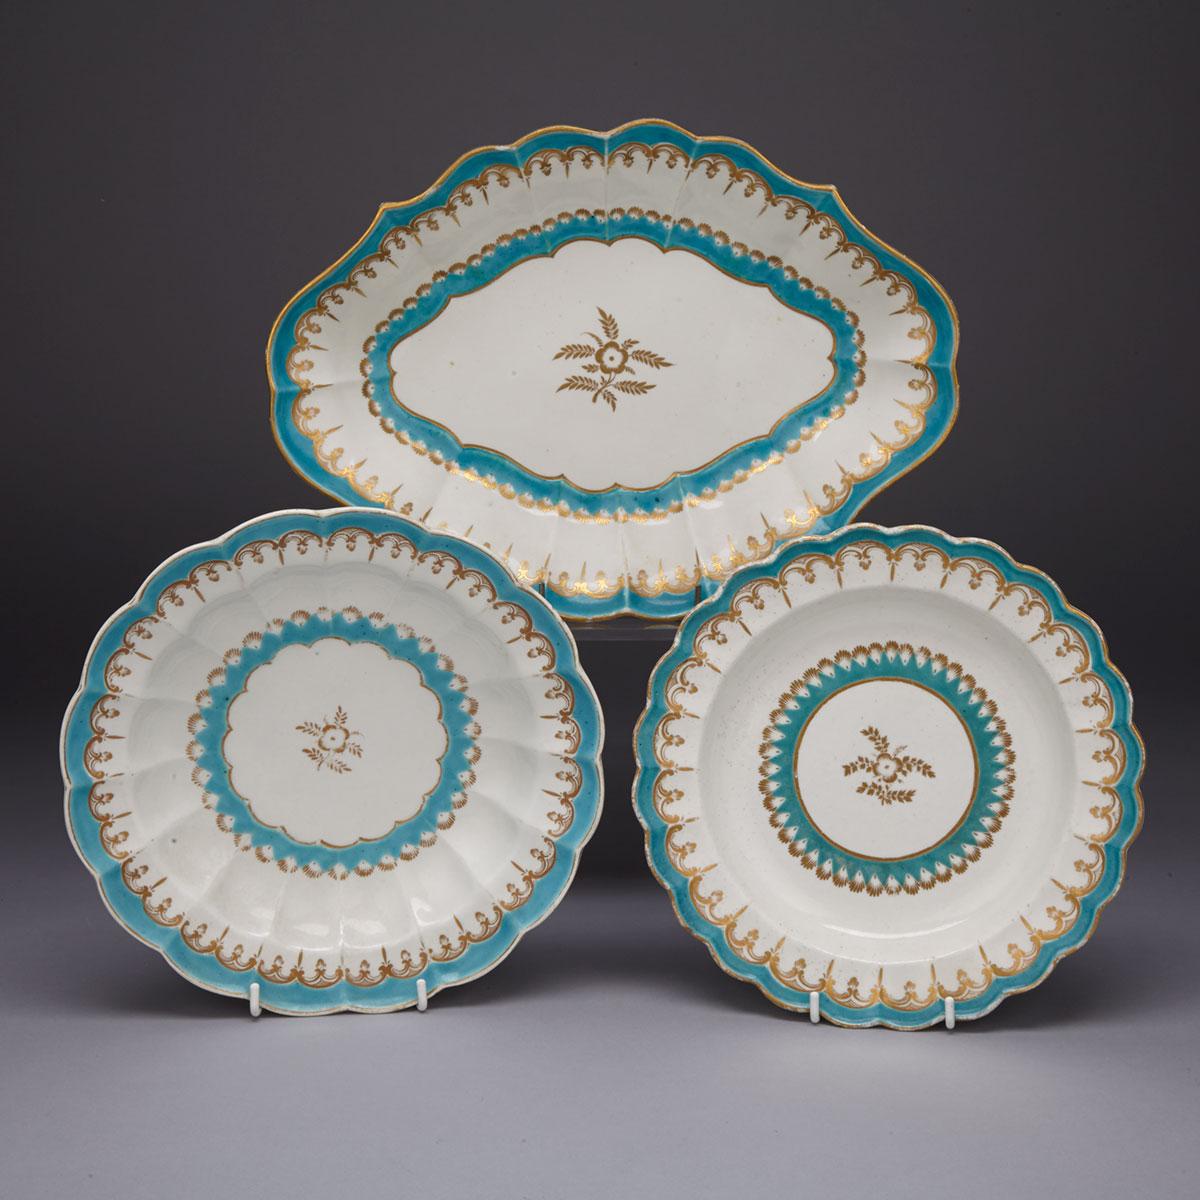 Worcester Oval Dish, Bowl and a Plate, c.1775